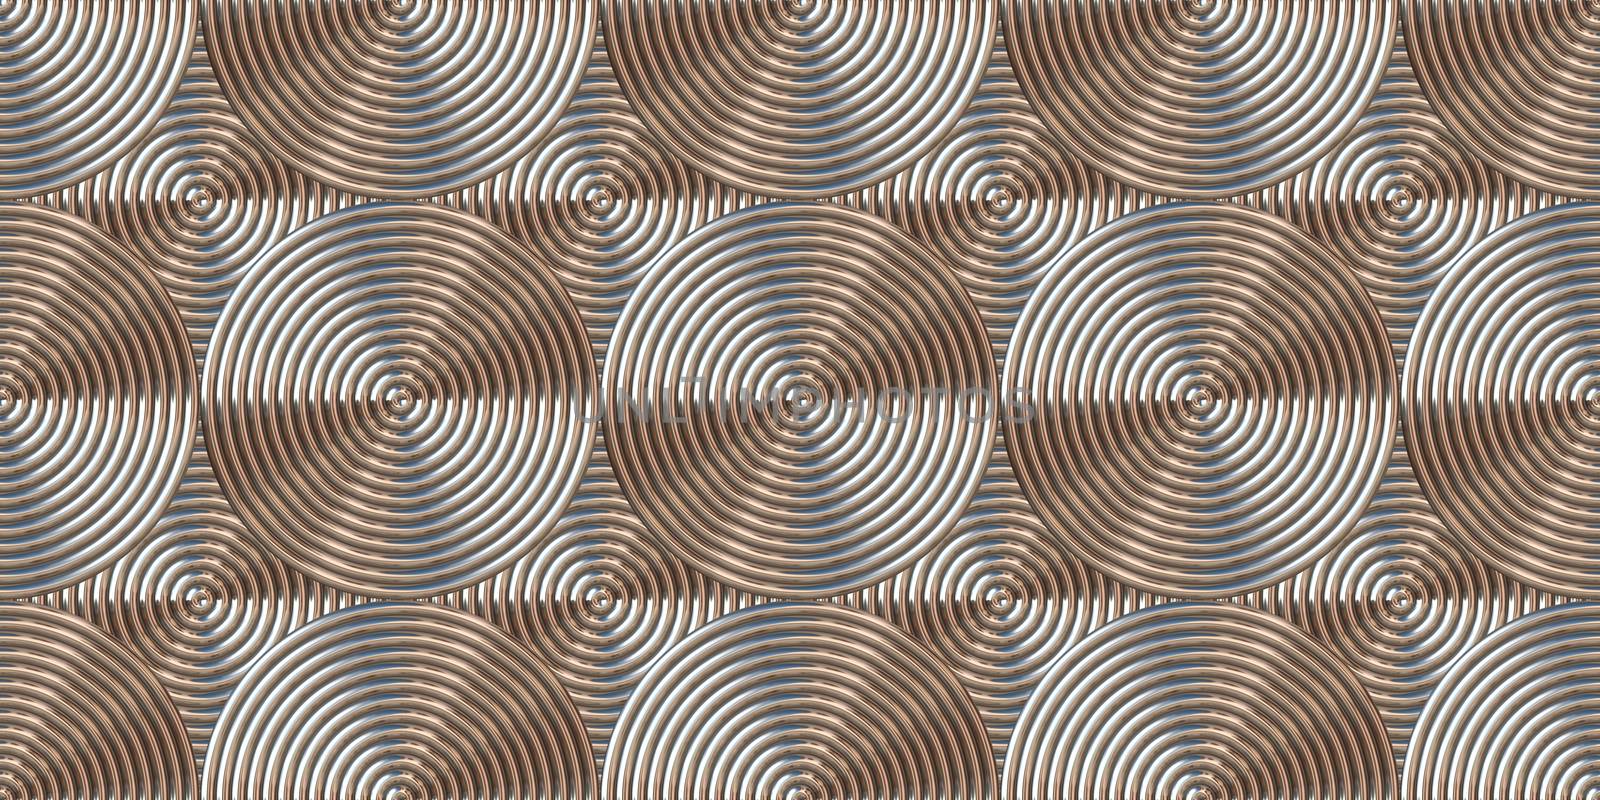 Chrome art deco seamless texture. Vintage silver rings background. Metal circles pattern.